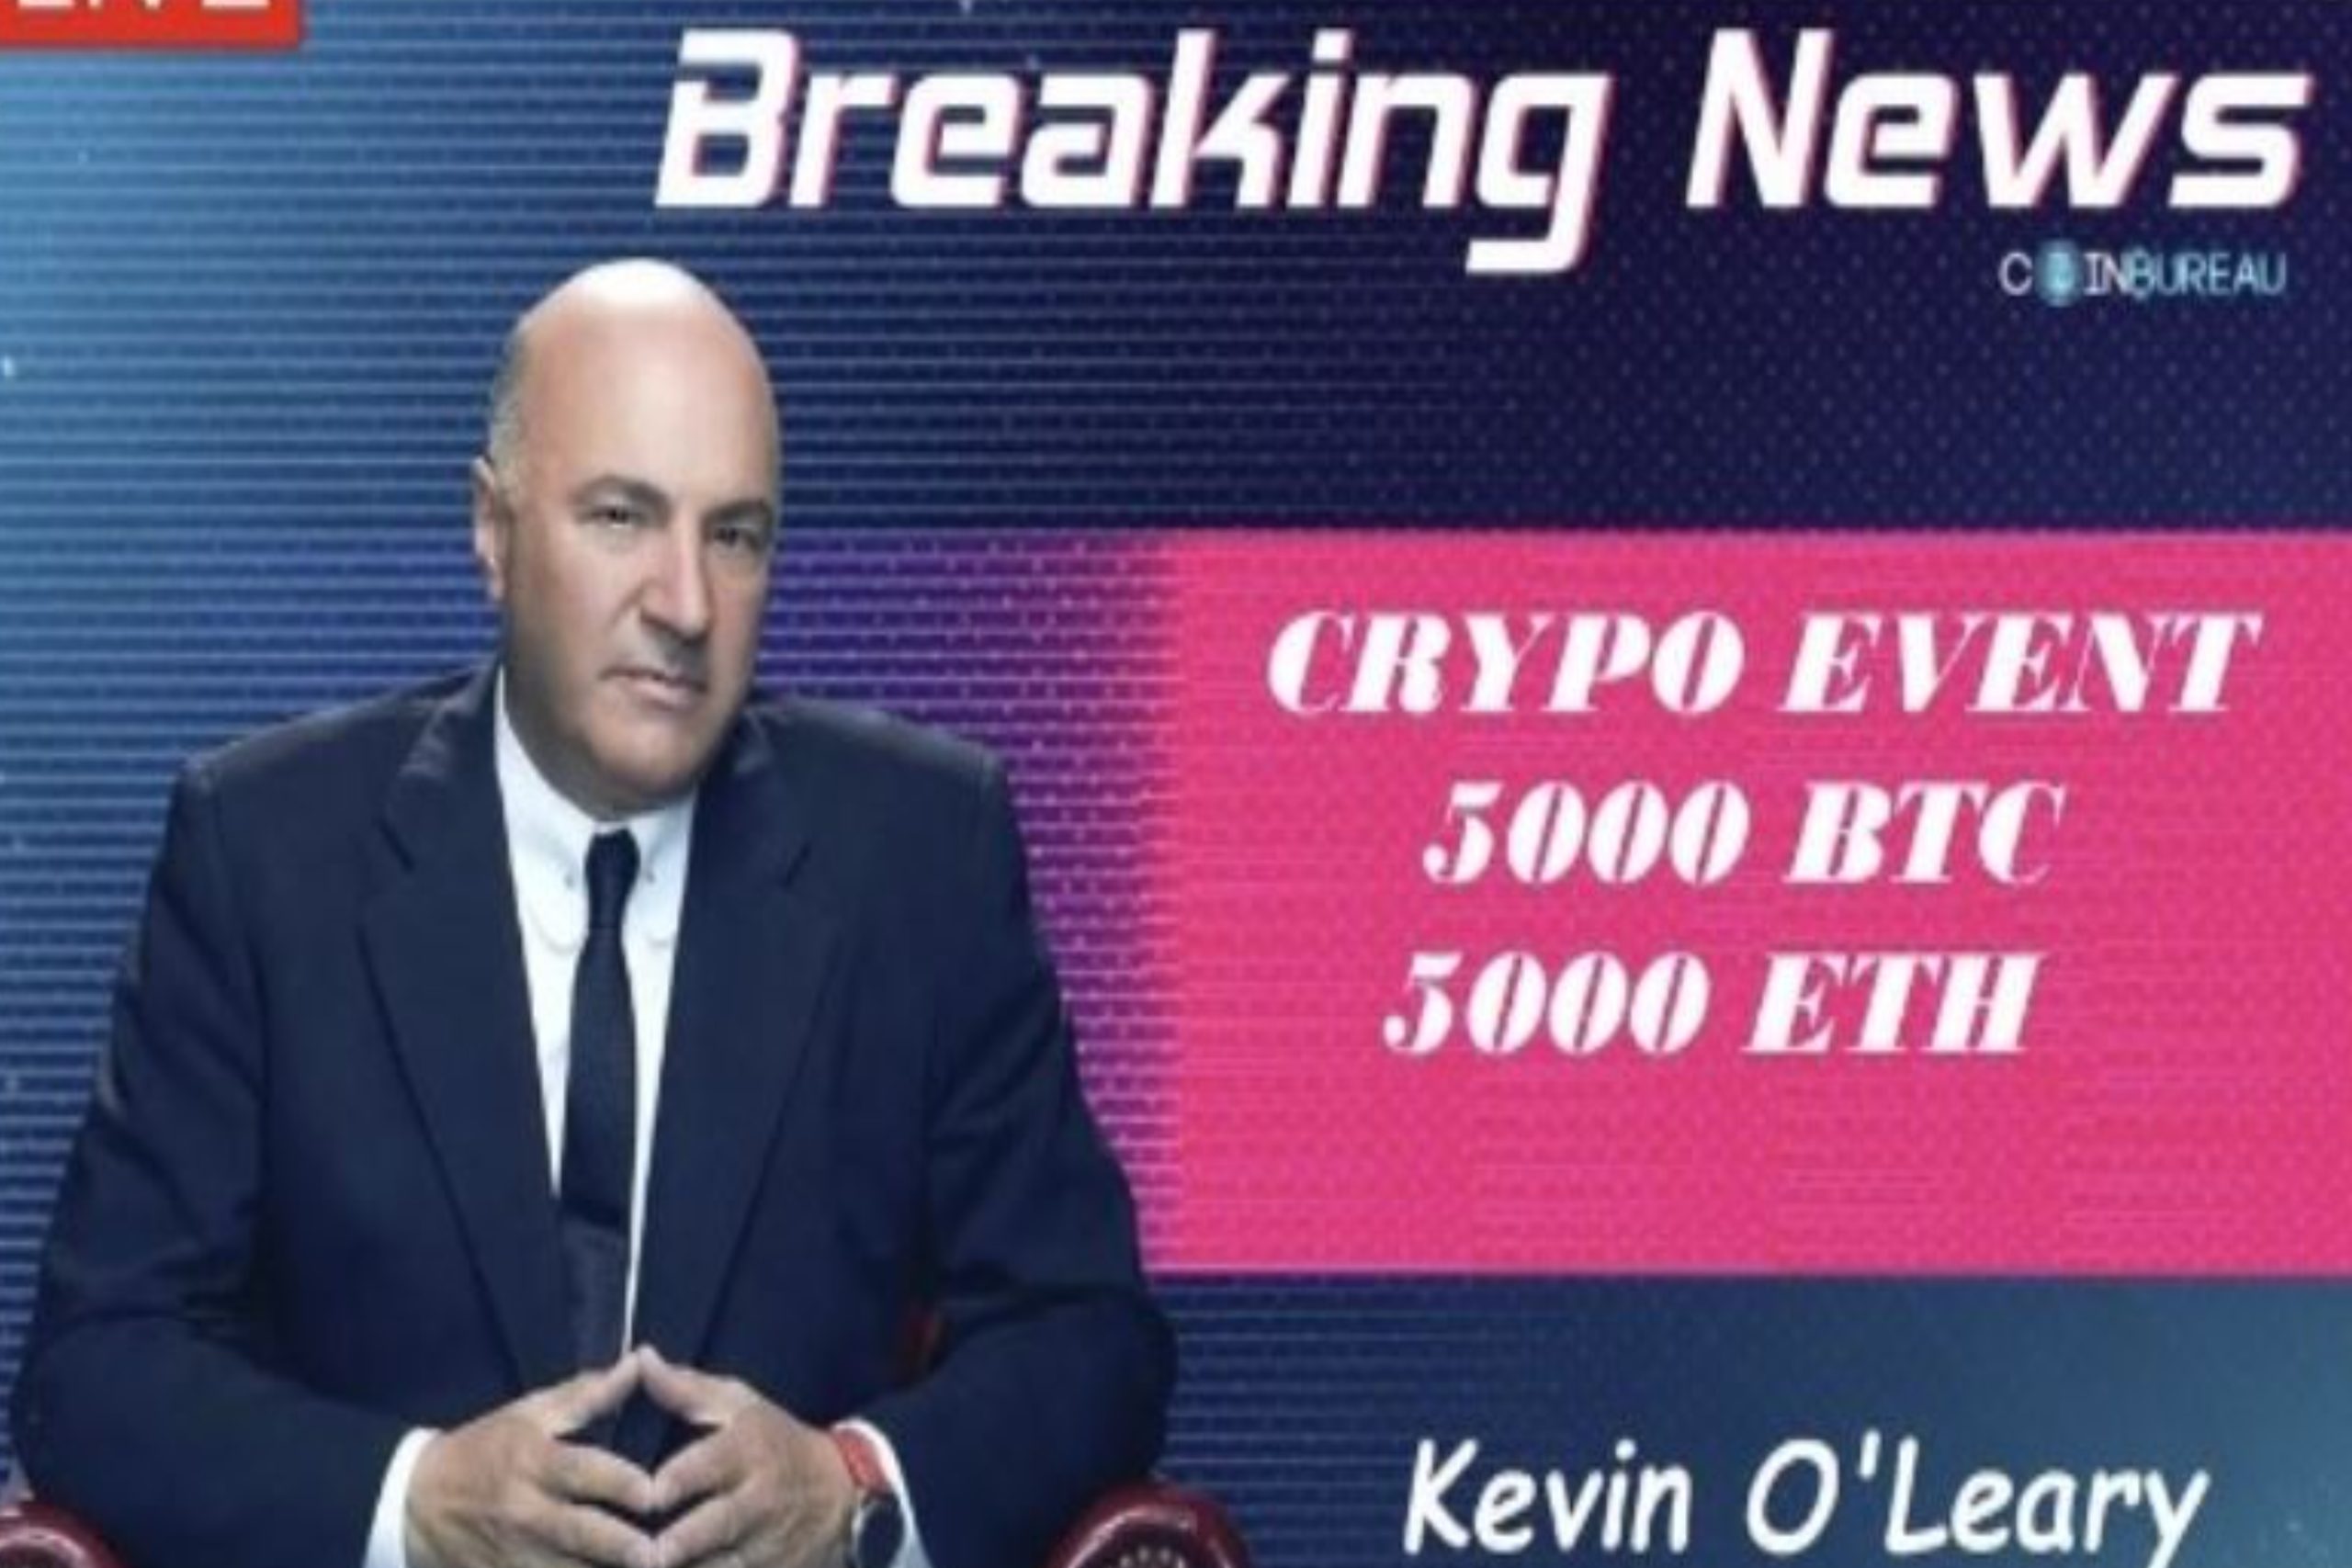 Shark Tank star Kevin O’Leary’s Twitter account was hacked promoting a cryptocurrency hoax